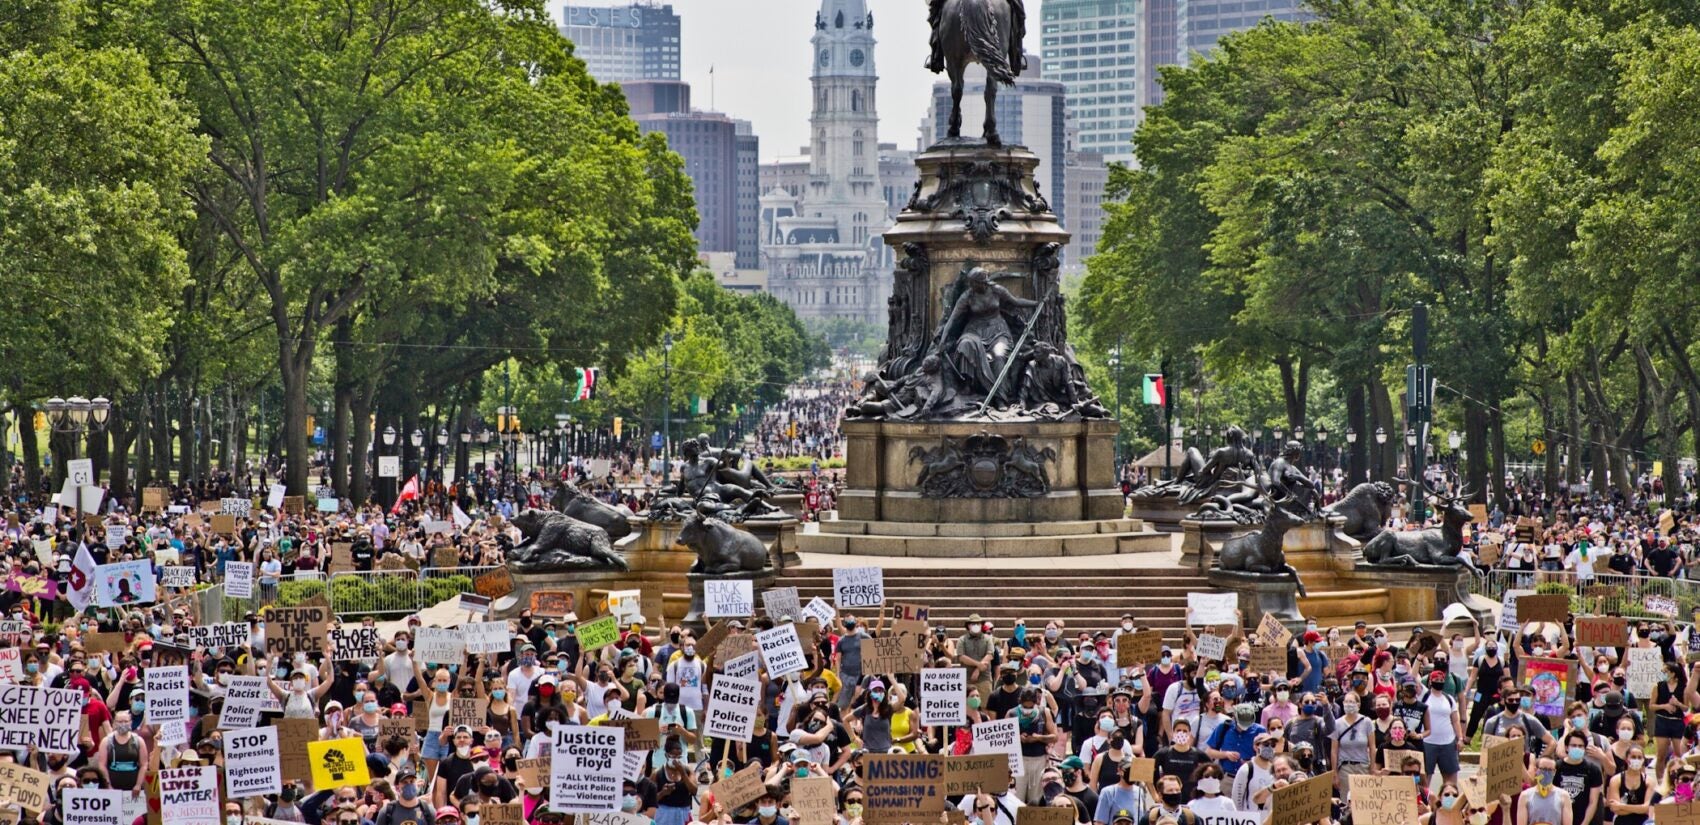 Protesters took over the Benjamin Franklin Parkway in June 2020 to hear speakers from the Philly Socialists, who along with demanding an end to police brutality and justice for George Floyd, called for fair housing, funding for libraries, and health care for all. (Kimberly Paynter/WHYY)